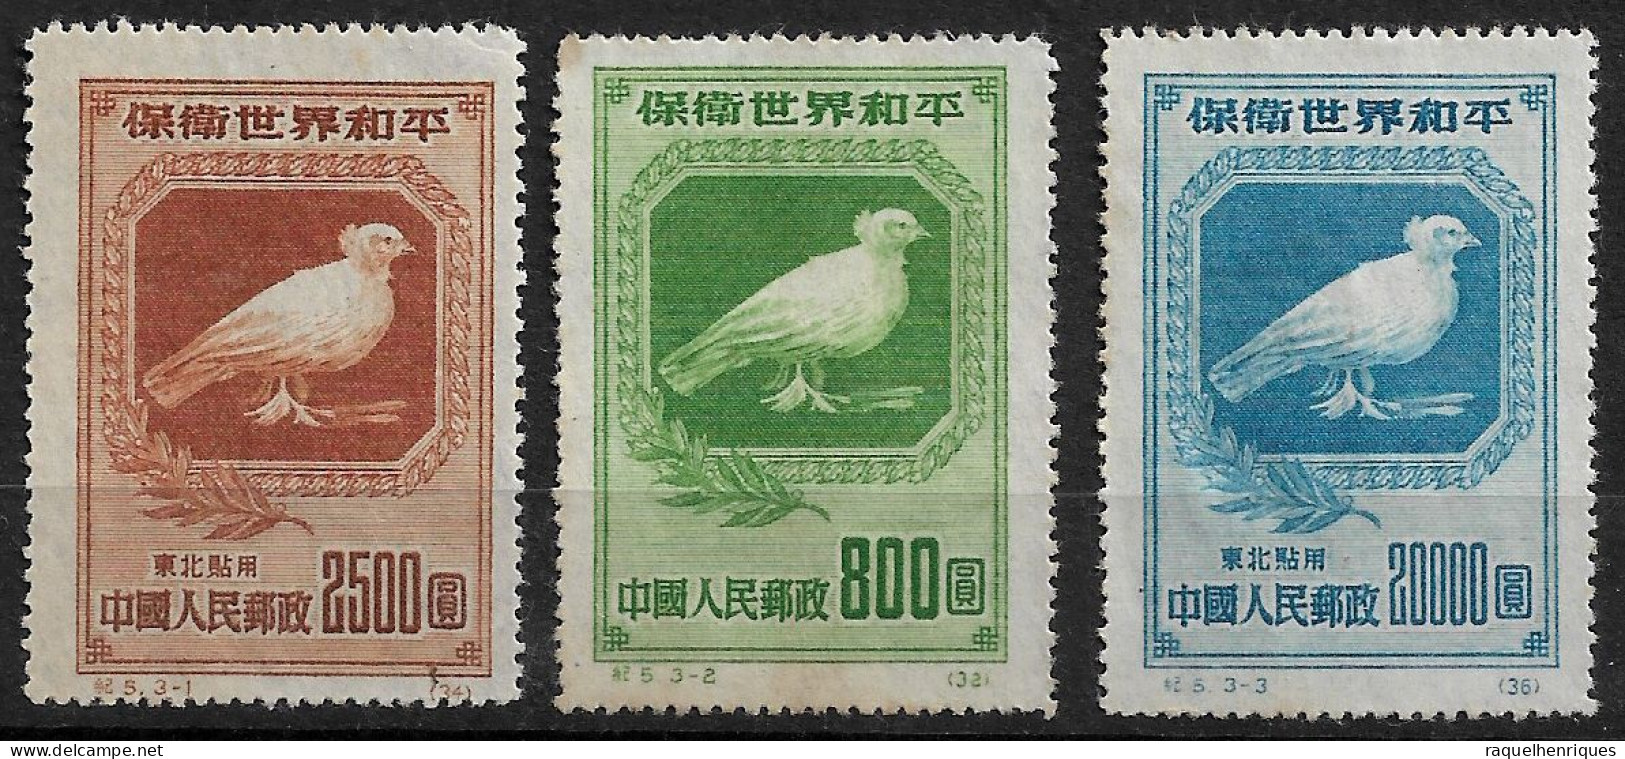 CHINA Northeast China 1950 Peace Dove And Olive Branch MH ISSUED NG (NP#72-P30-L3) - Chine Du Nord-Est 1946-48